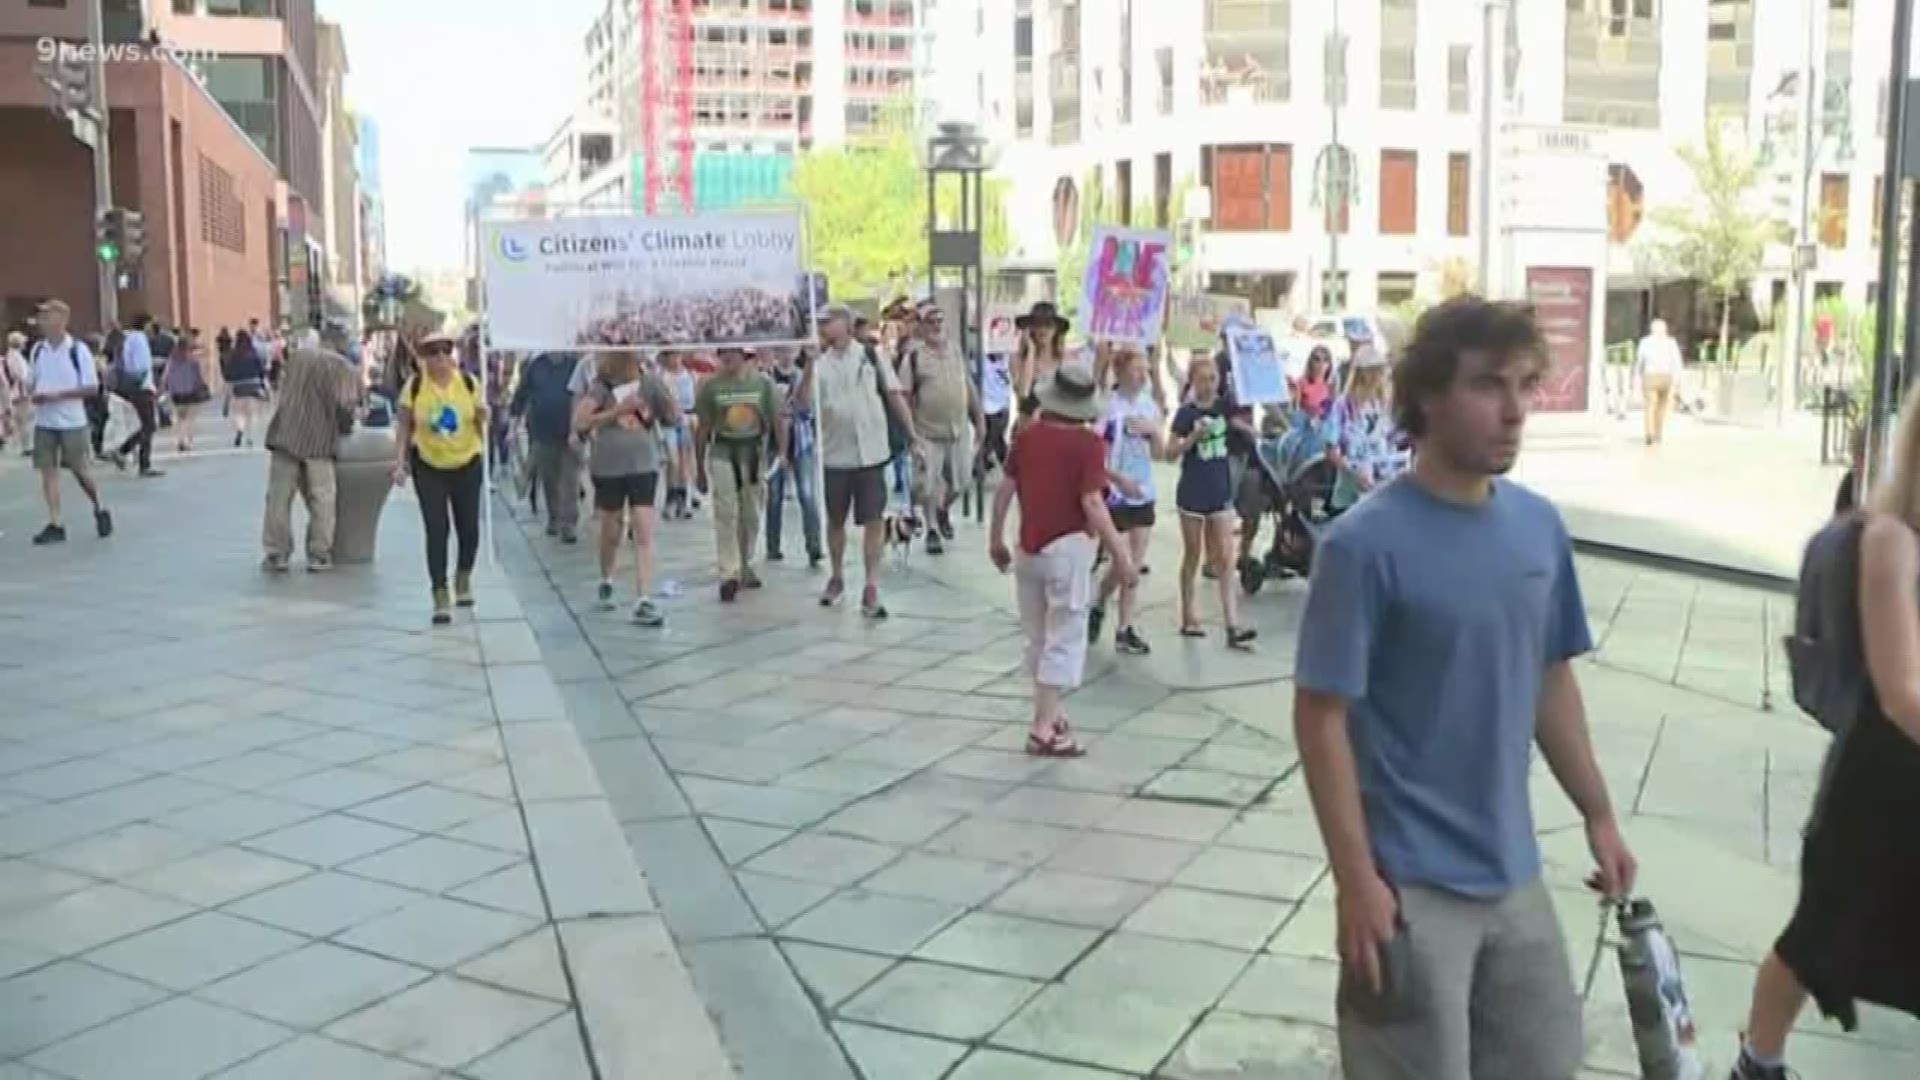 Protesters all over the world including Denver area gathering to demand action on climate change.